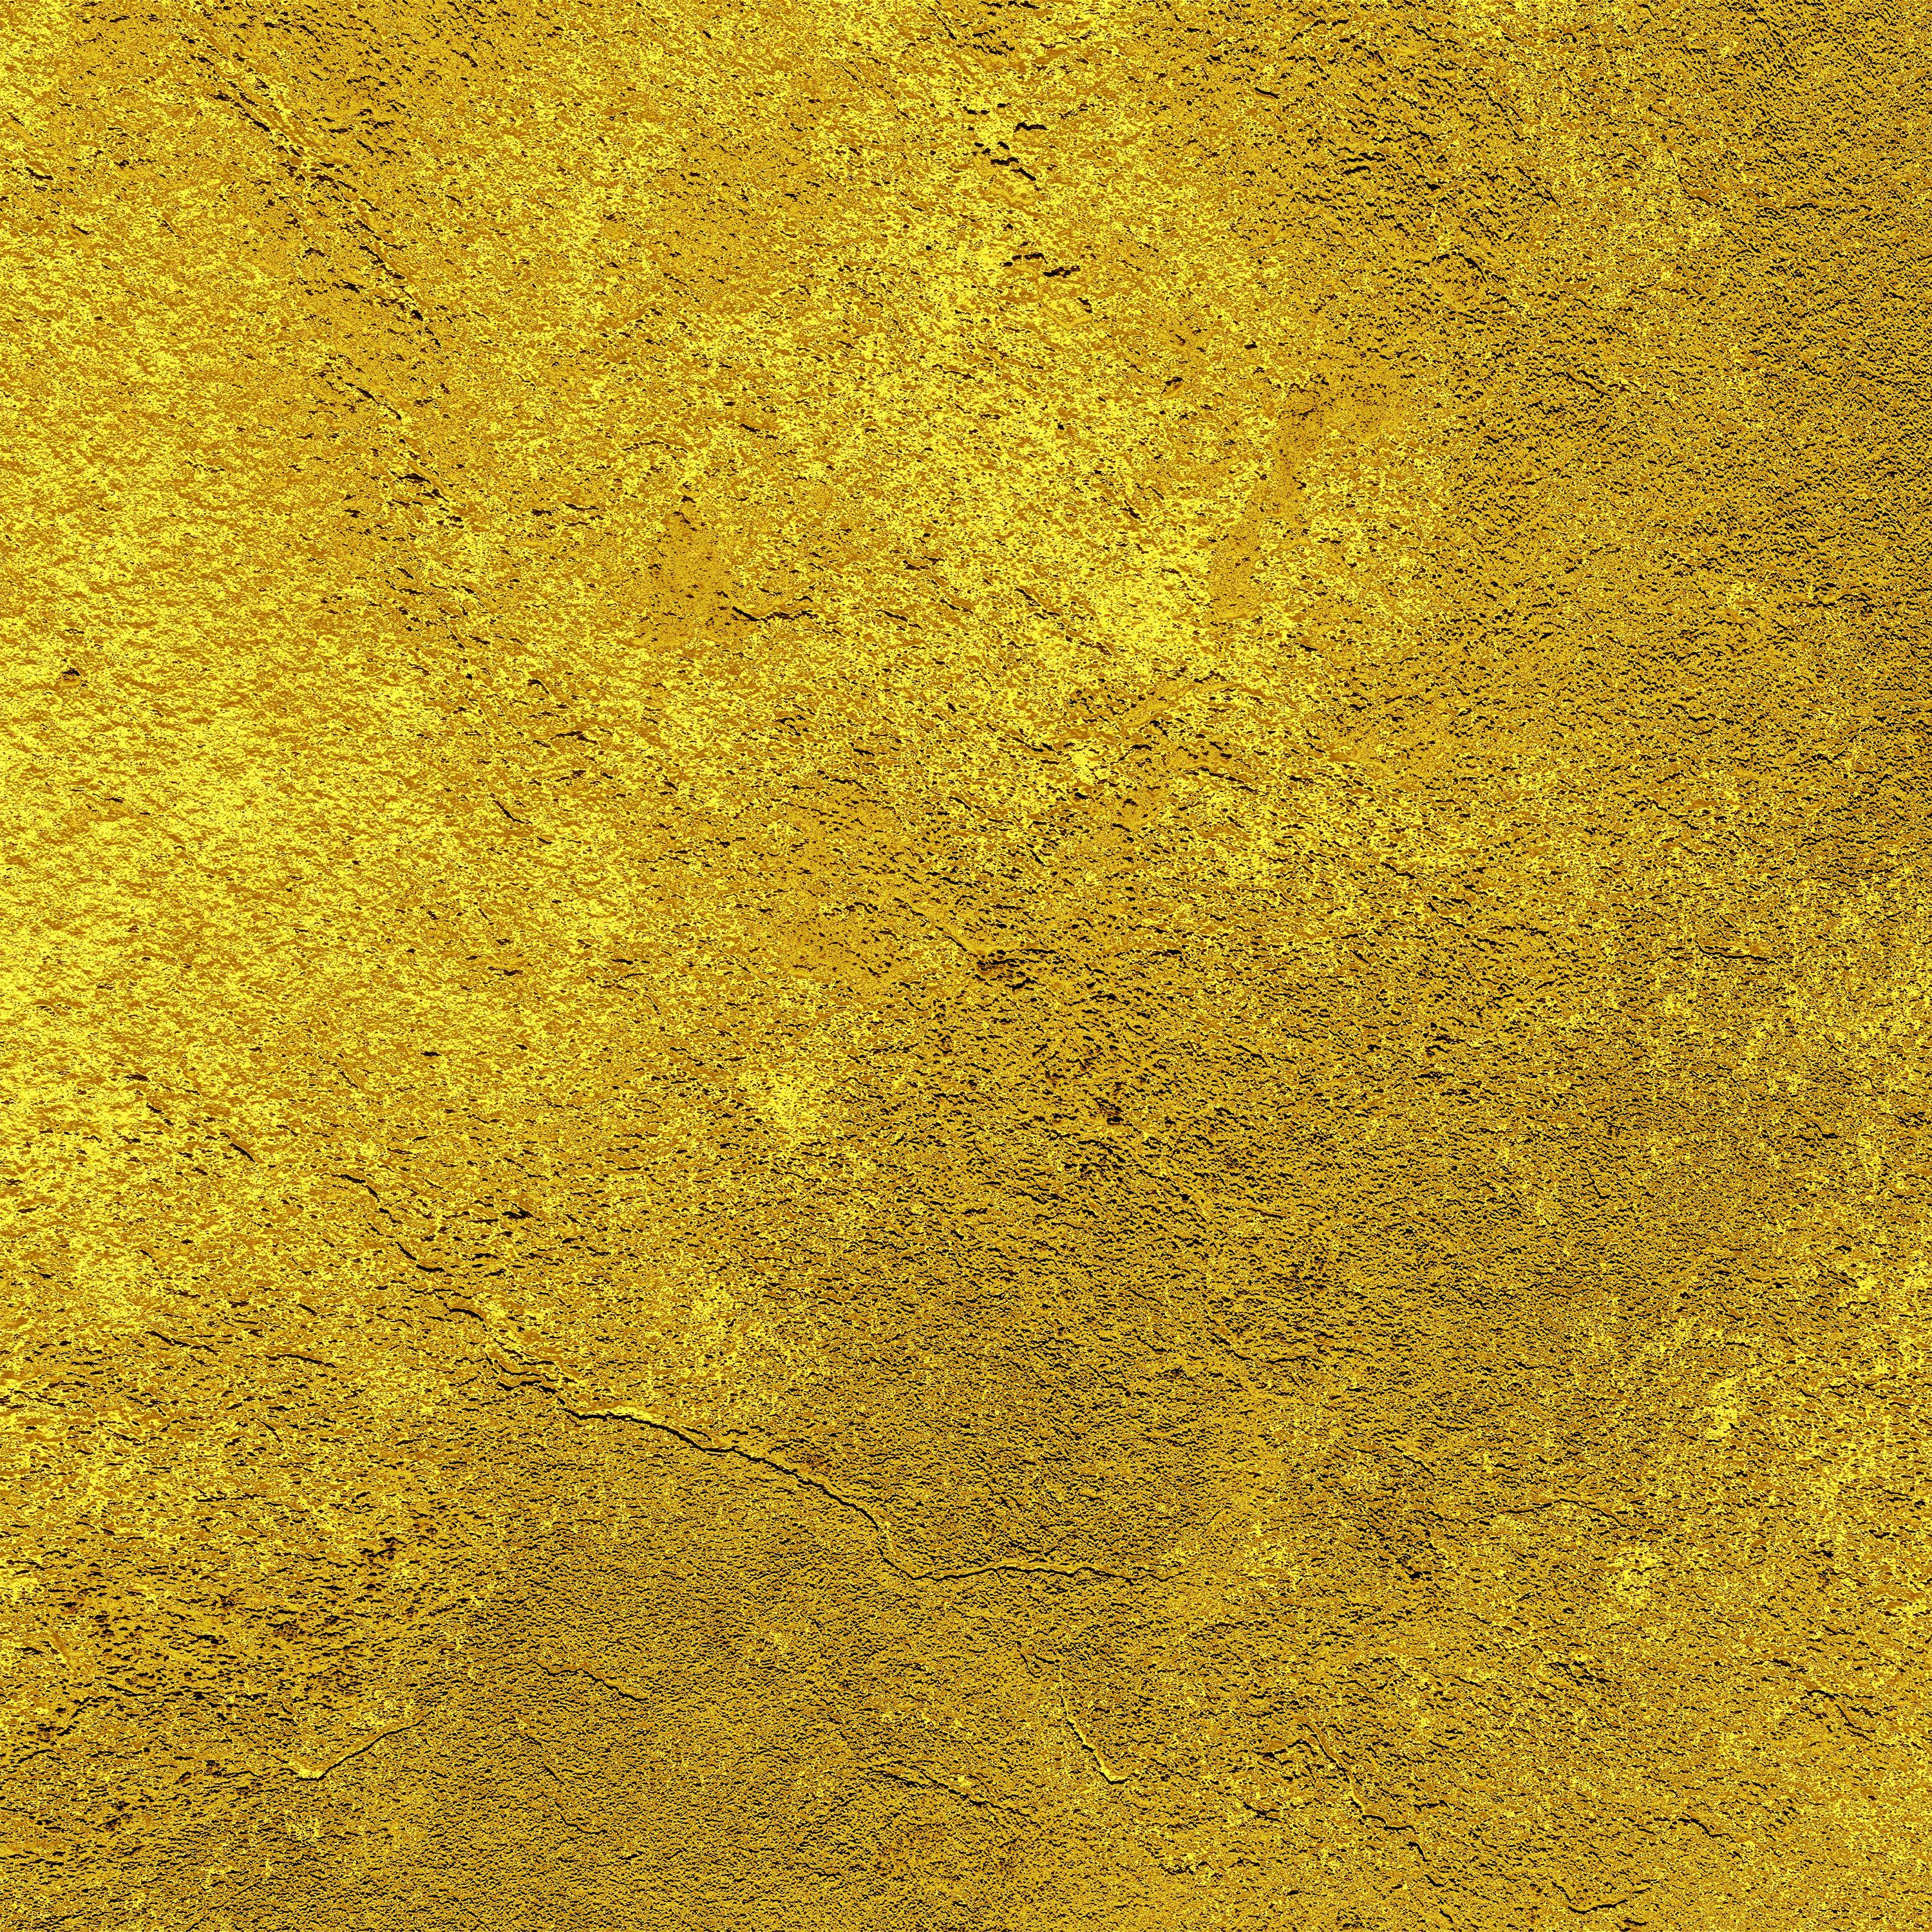 Foil Gold Background Quality Image